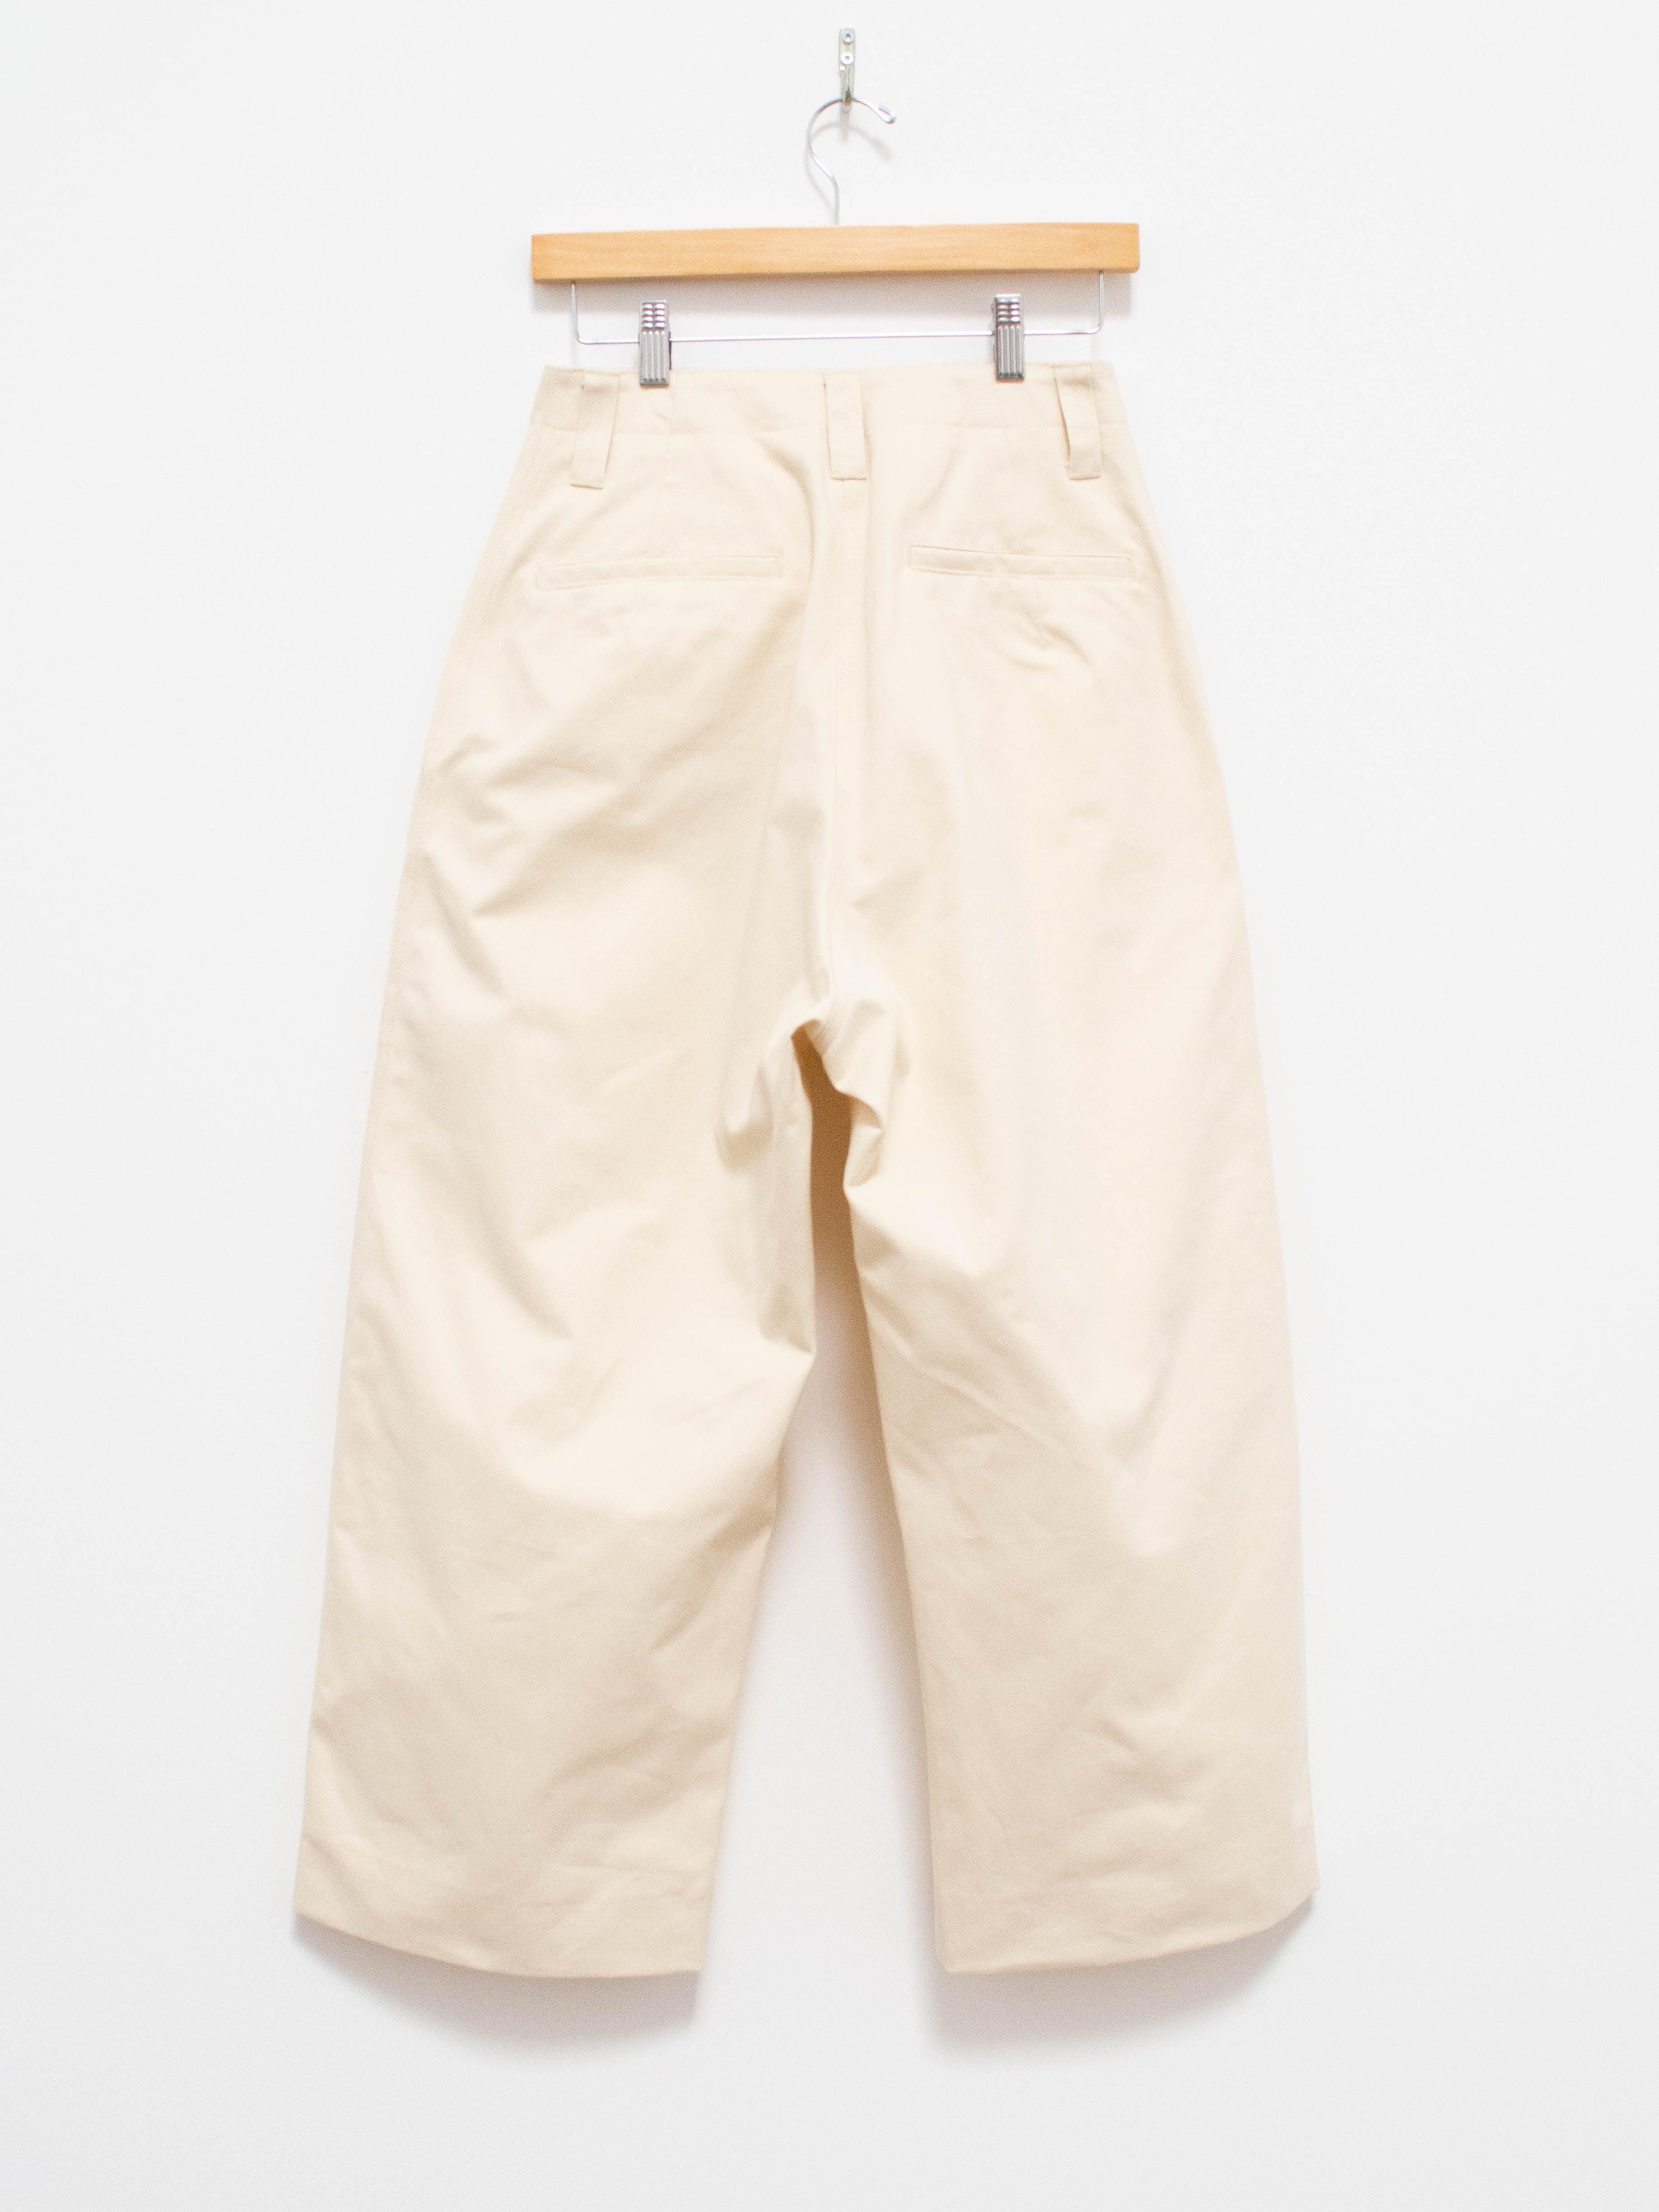 Asher Peached Cotton Twill Pants - Cream